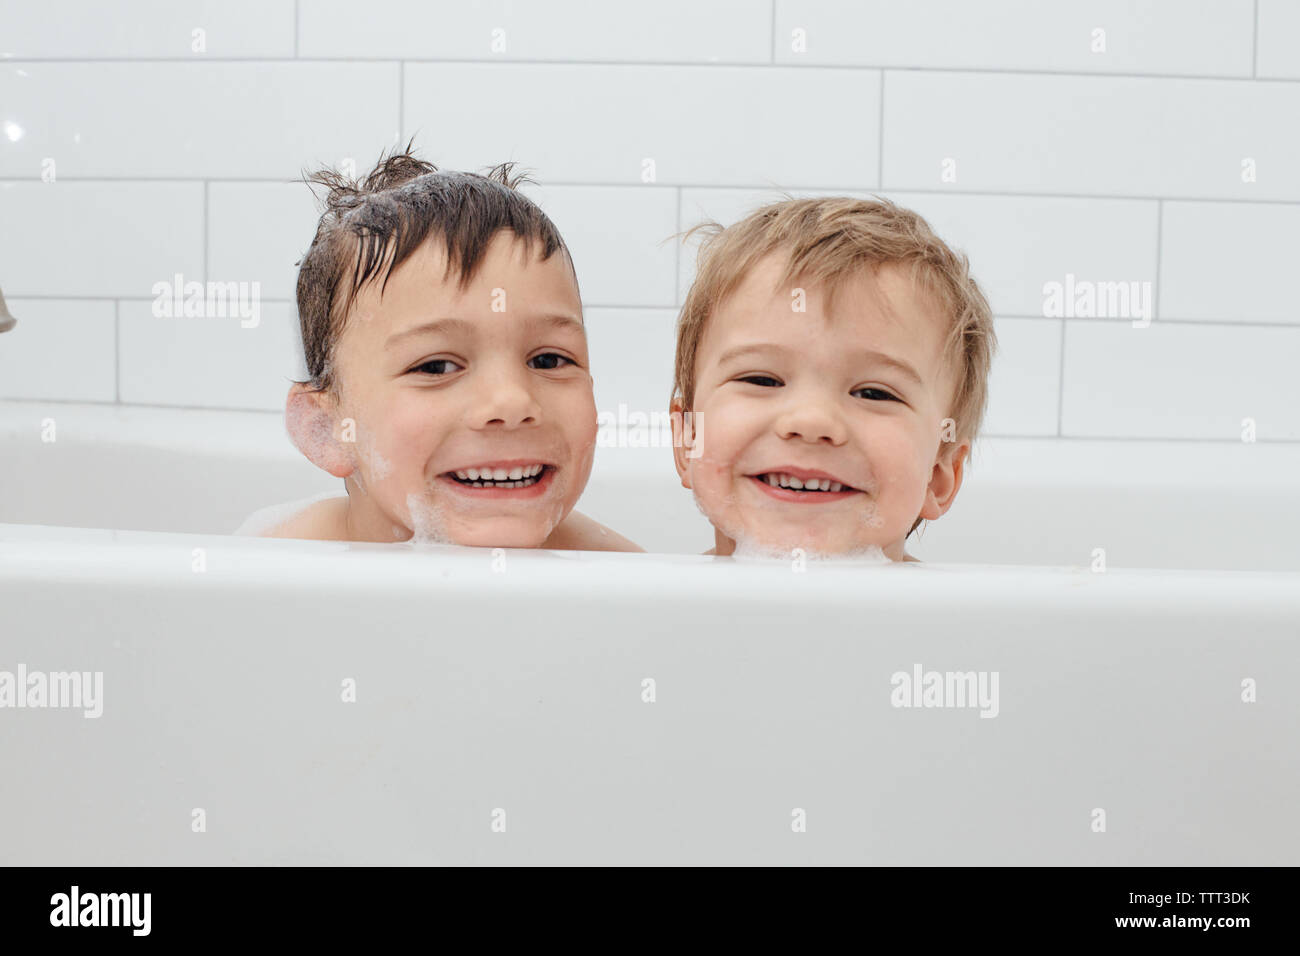 Brothers with big smiles taking a bubble bath Stock Photo